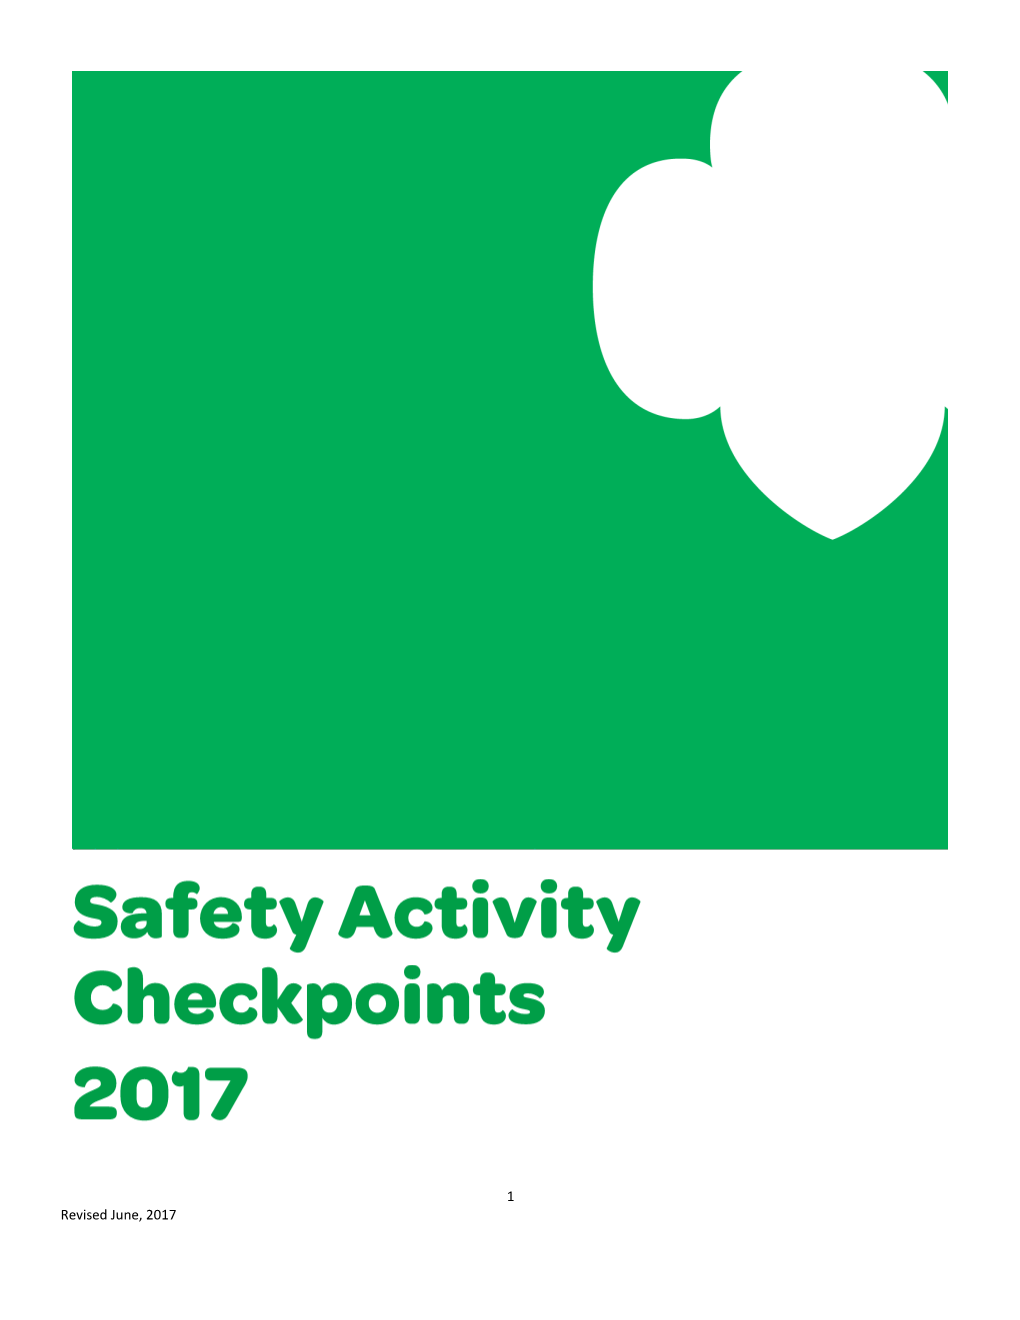 Girl Scout Safety Activity Checkpoints